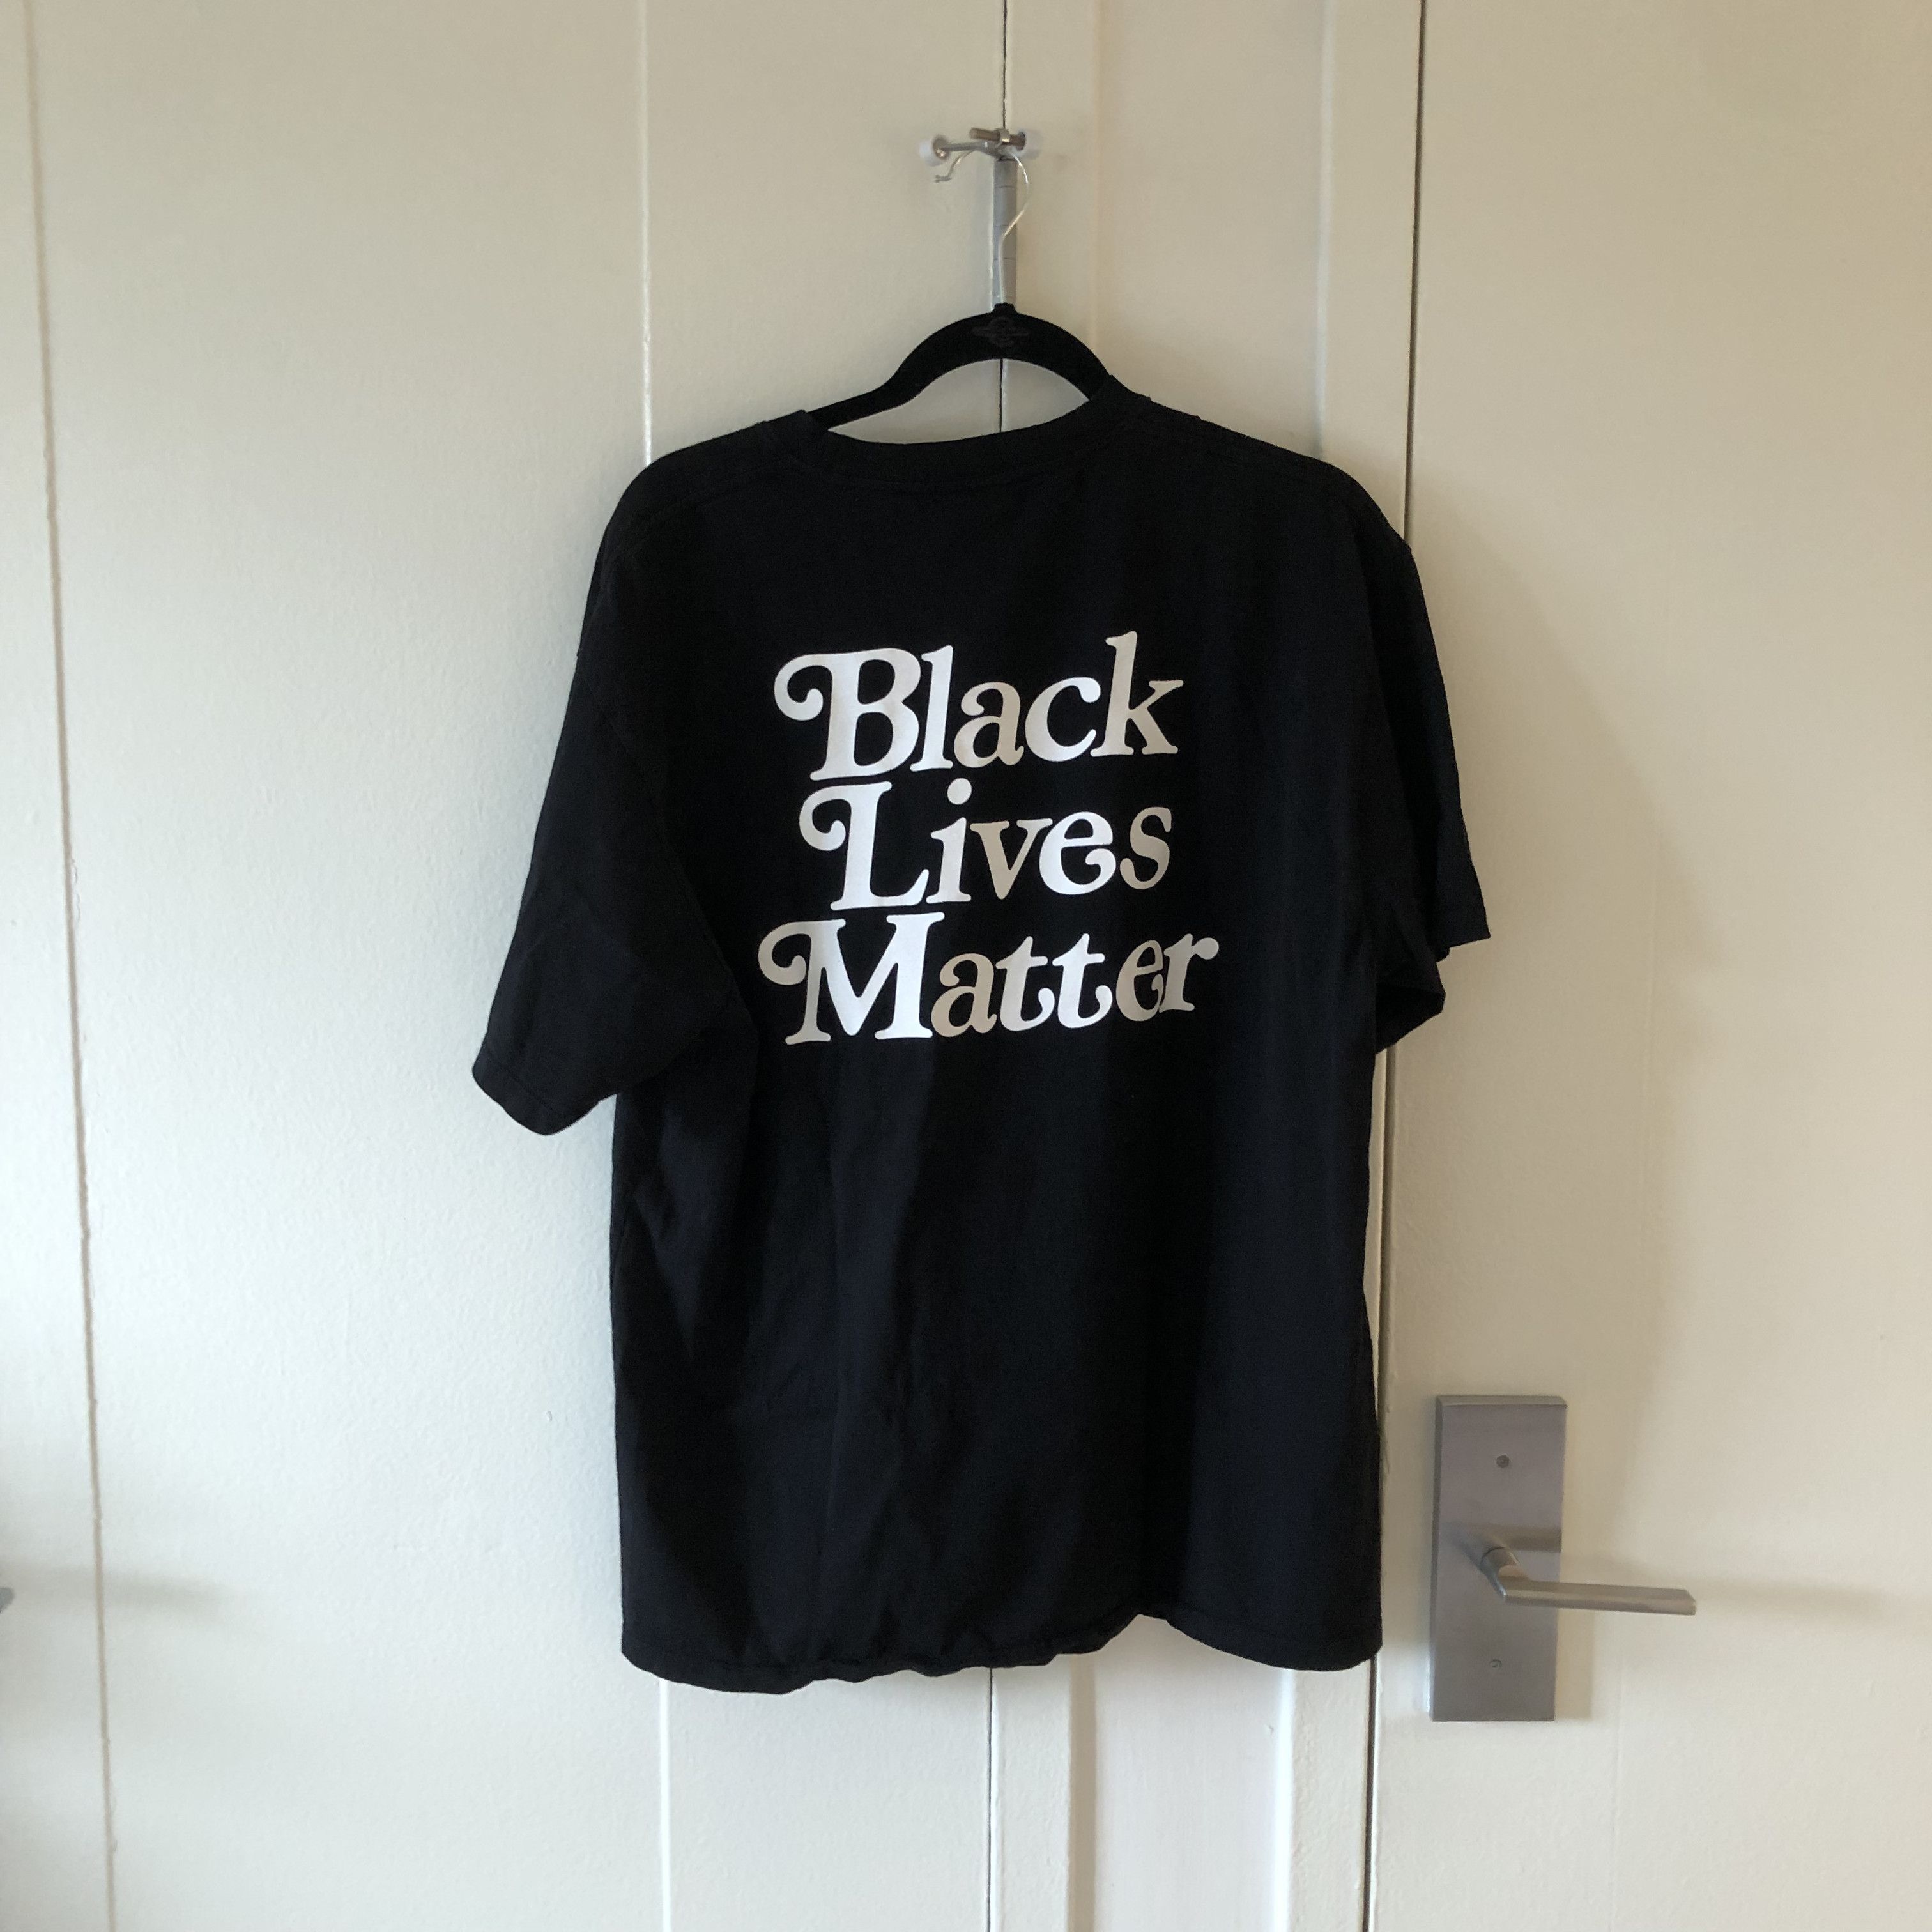 Girls Dont Cry Verdy x Girls Don't Cry Black Lives Matter Tee 